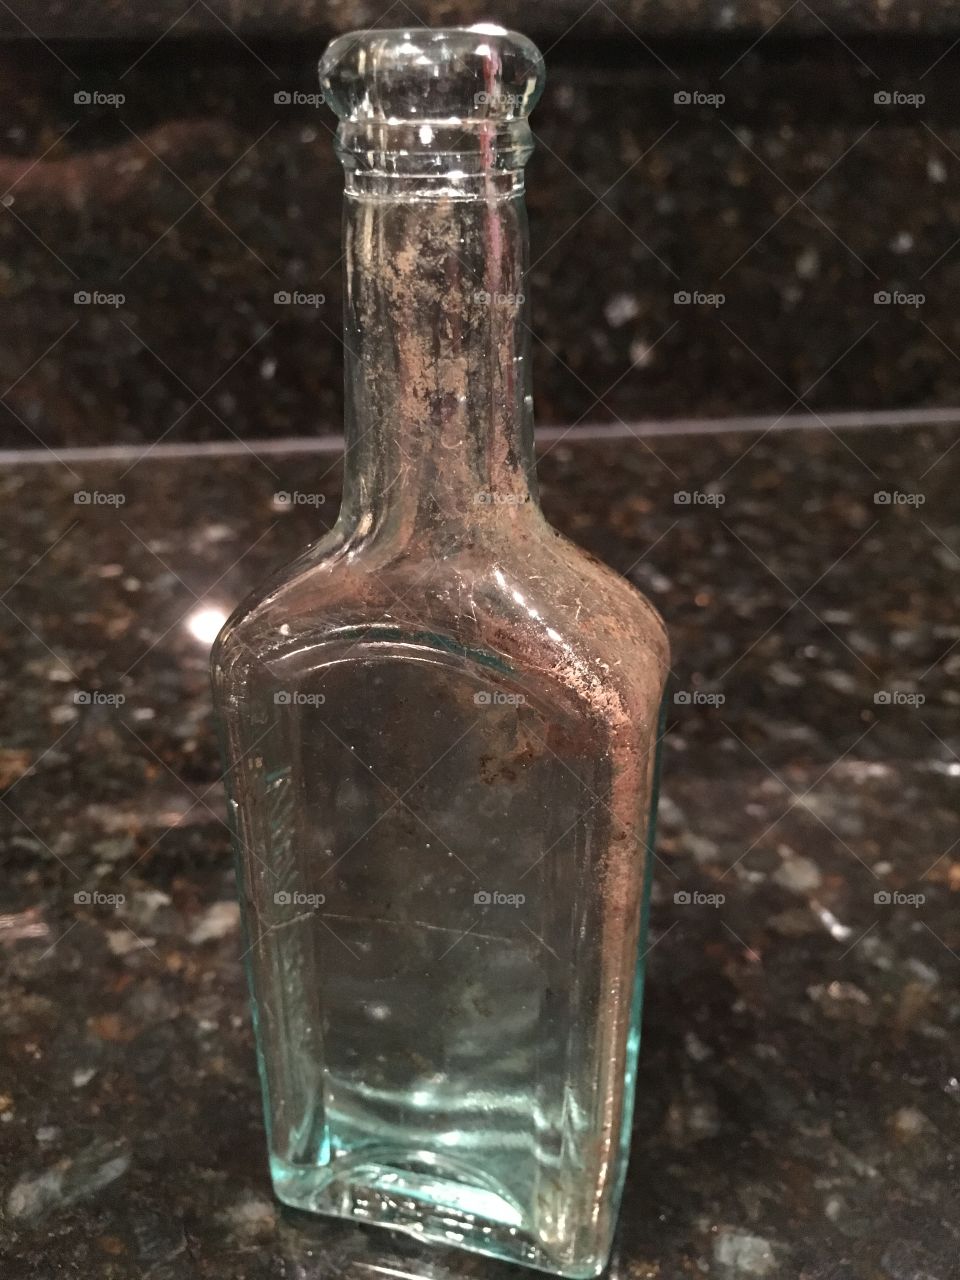 My husband was digging in the yard and found this old bottle.